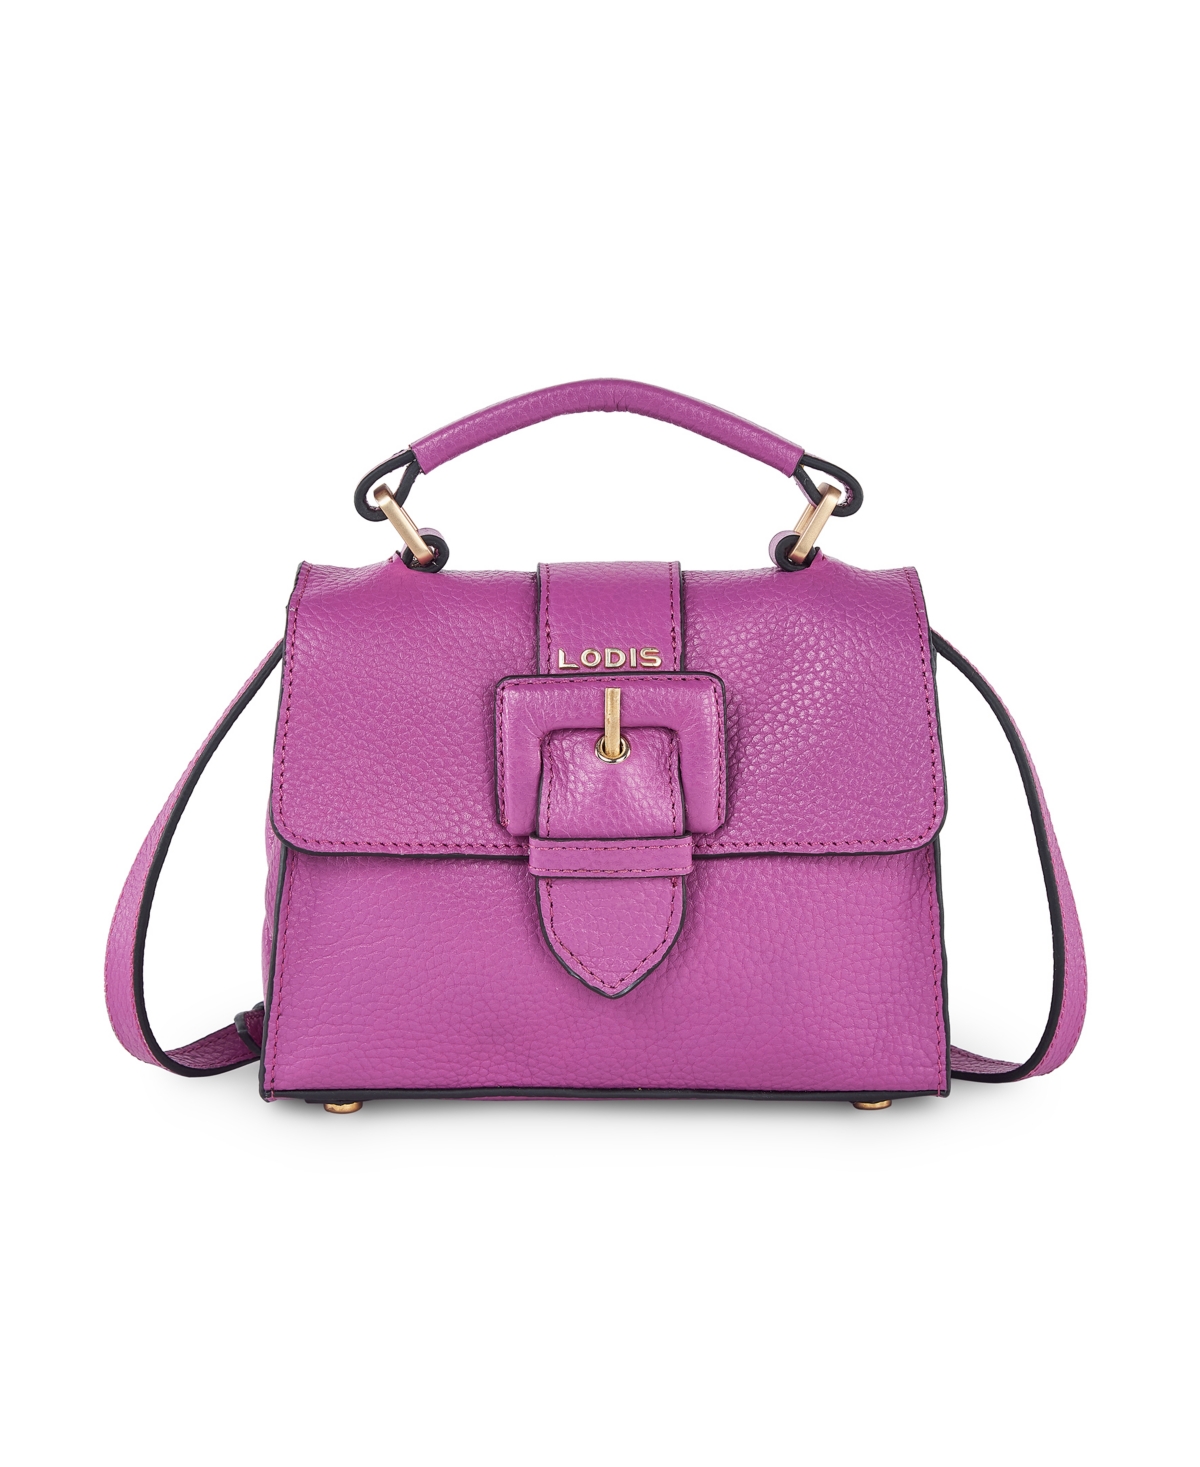 Lodis Women's Addison Top Handle Bag In Orchid